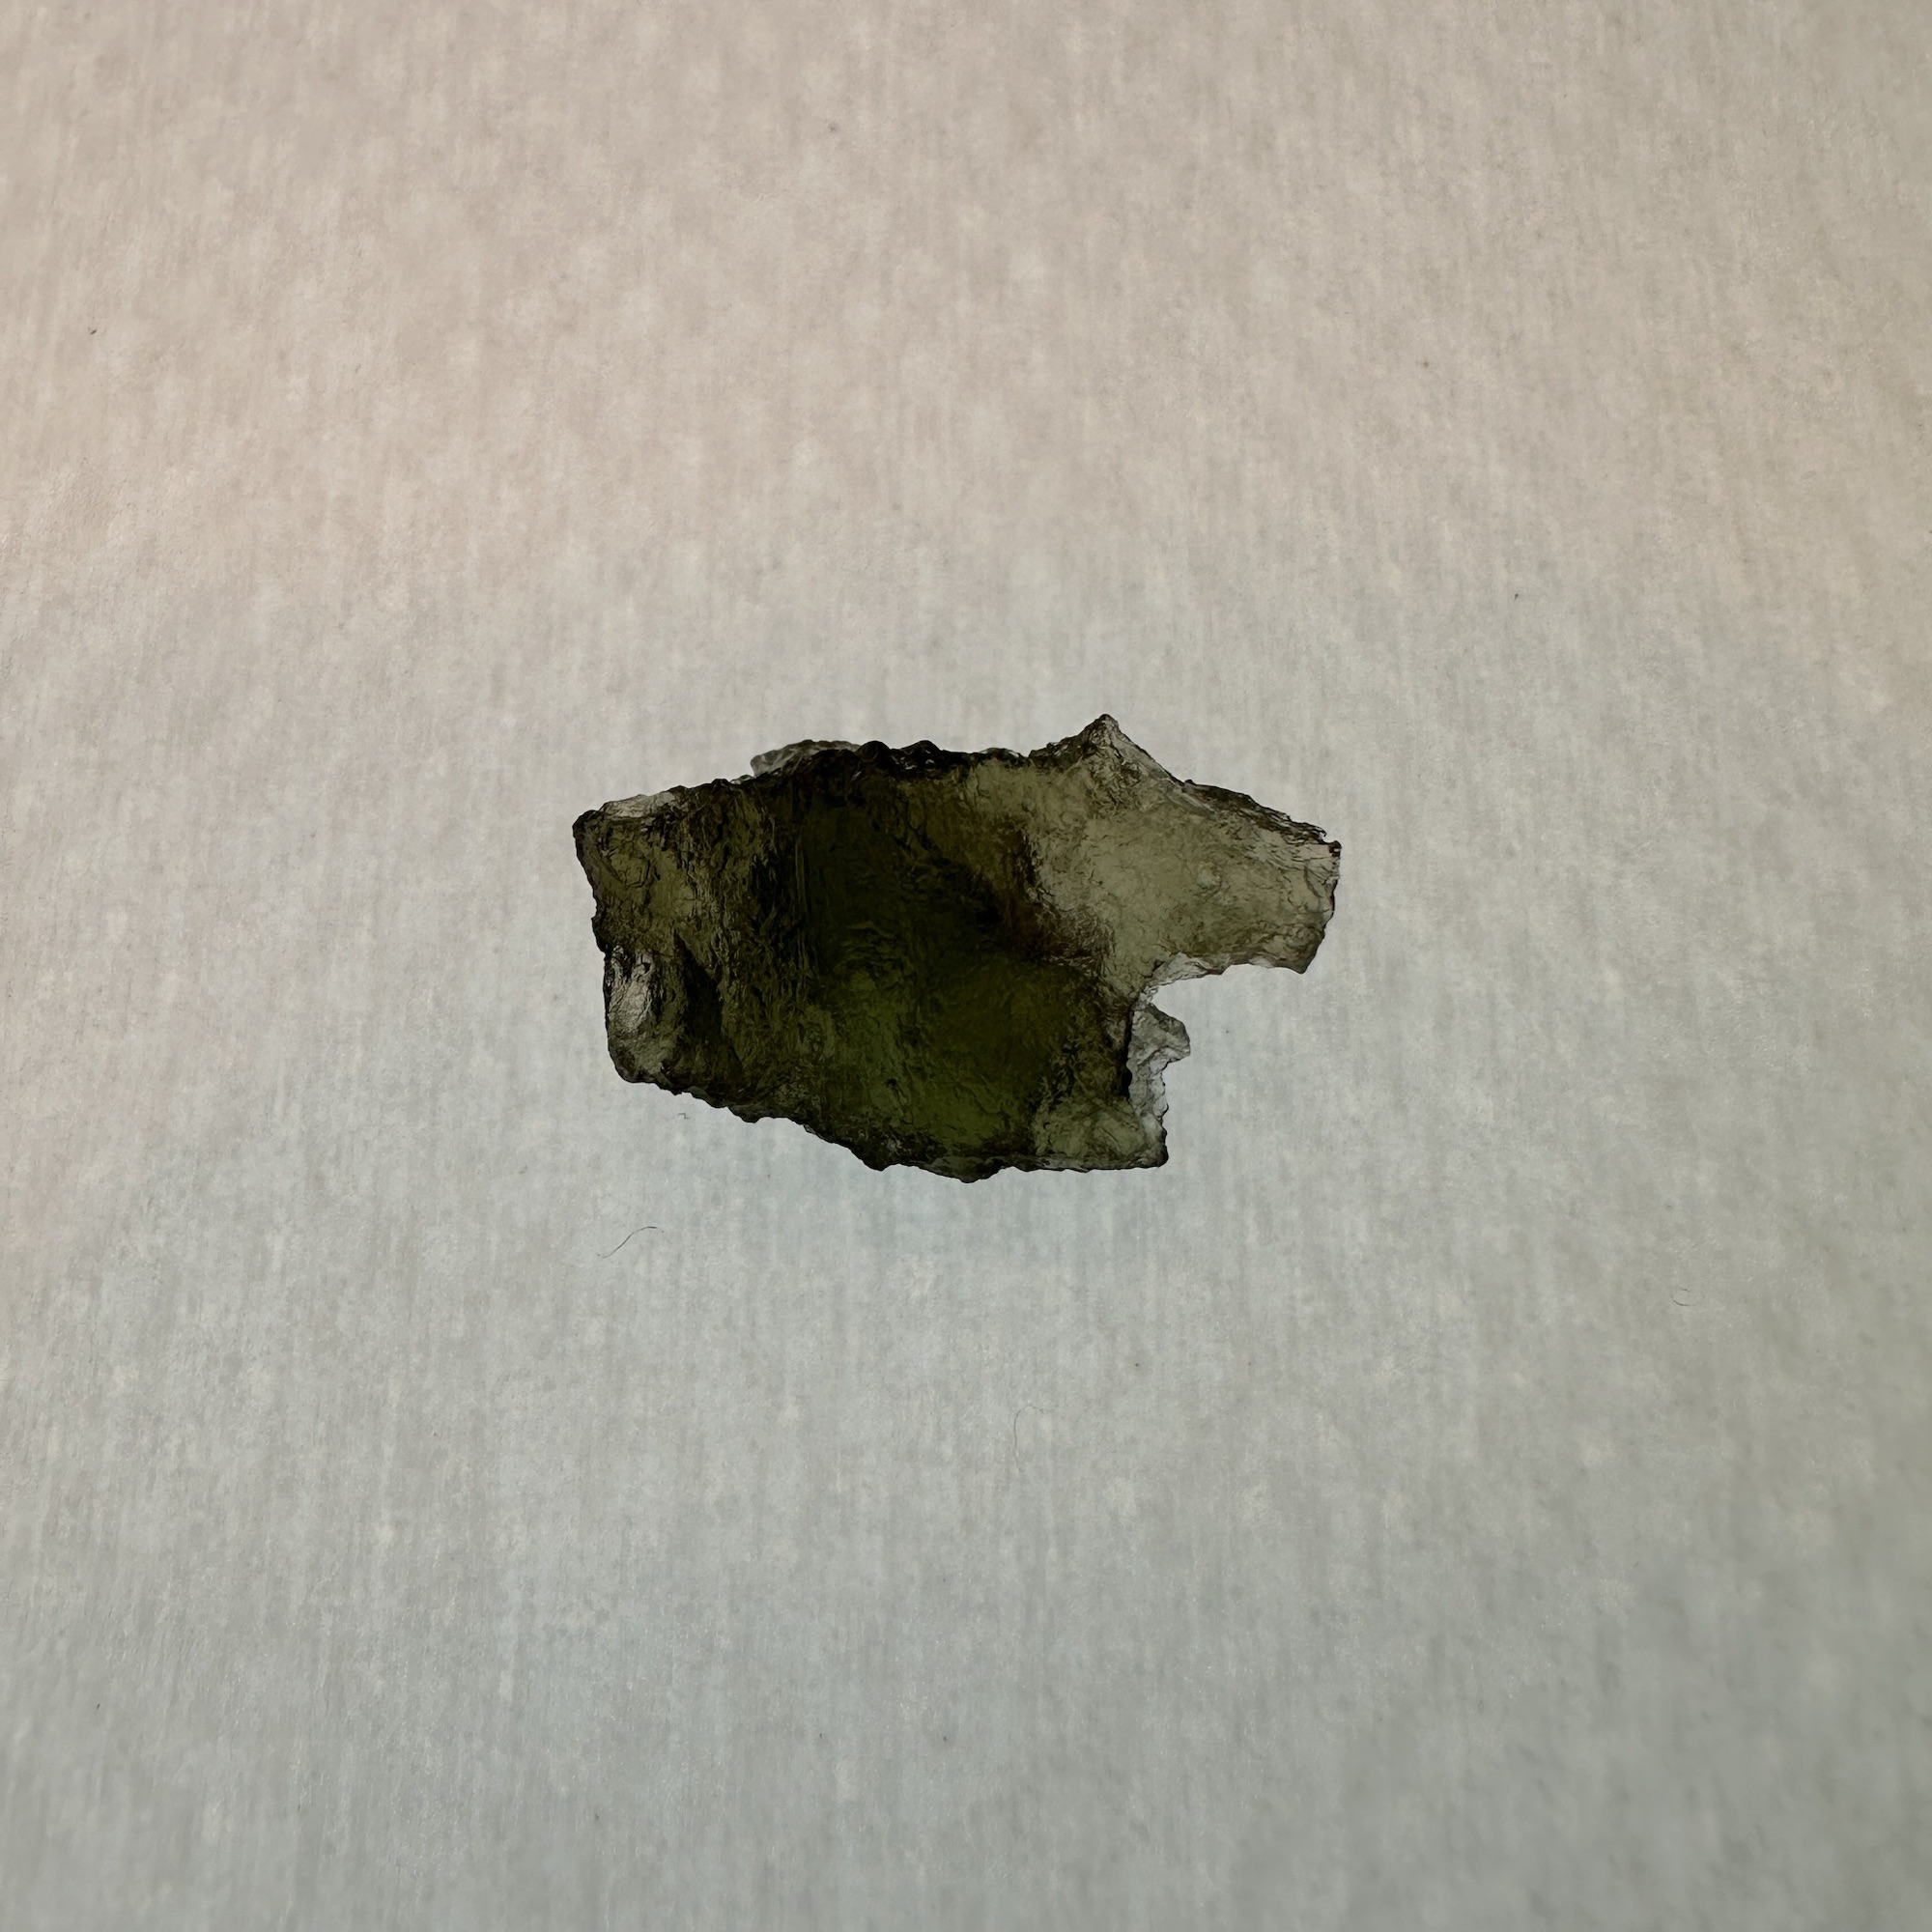 Amazing high grade moldavite meteoritic glass Tektite. Exceptional clarity and color